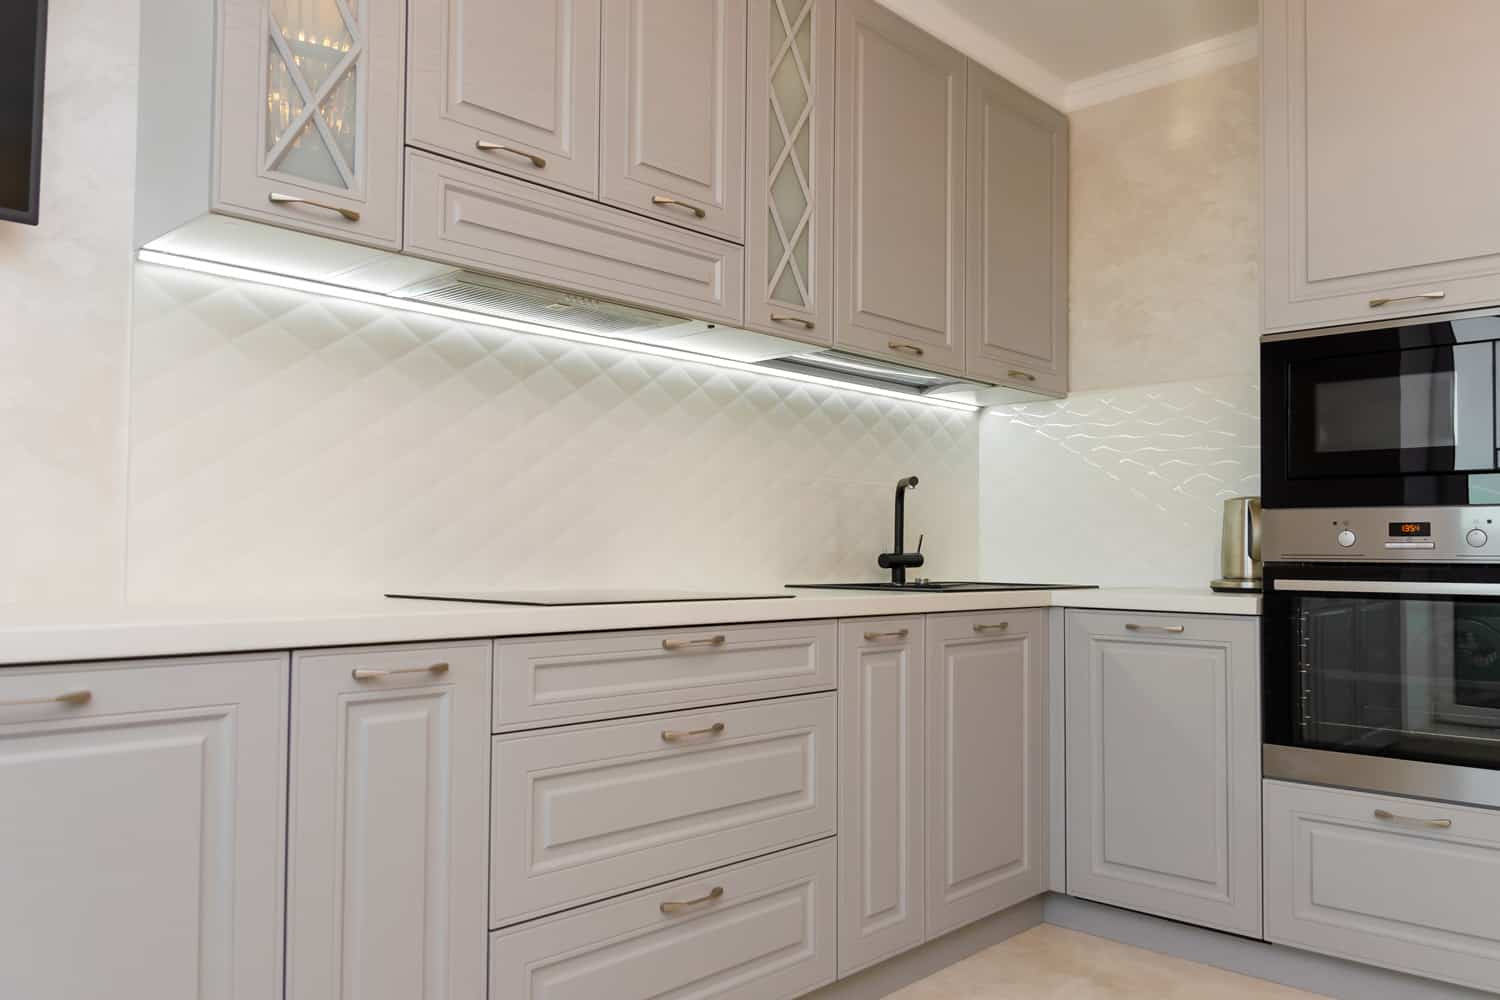 Beautiful interior of a classic kitchen in light gray and white colors with led lighting